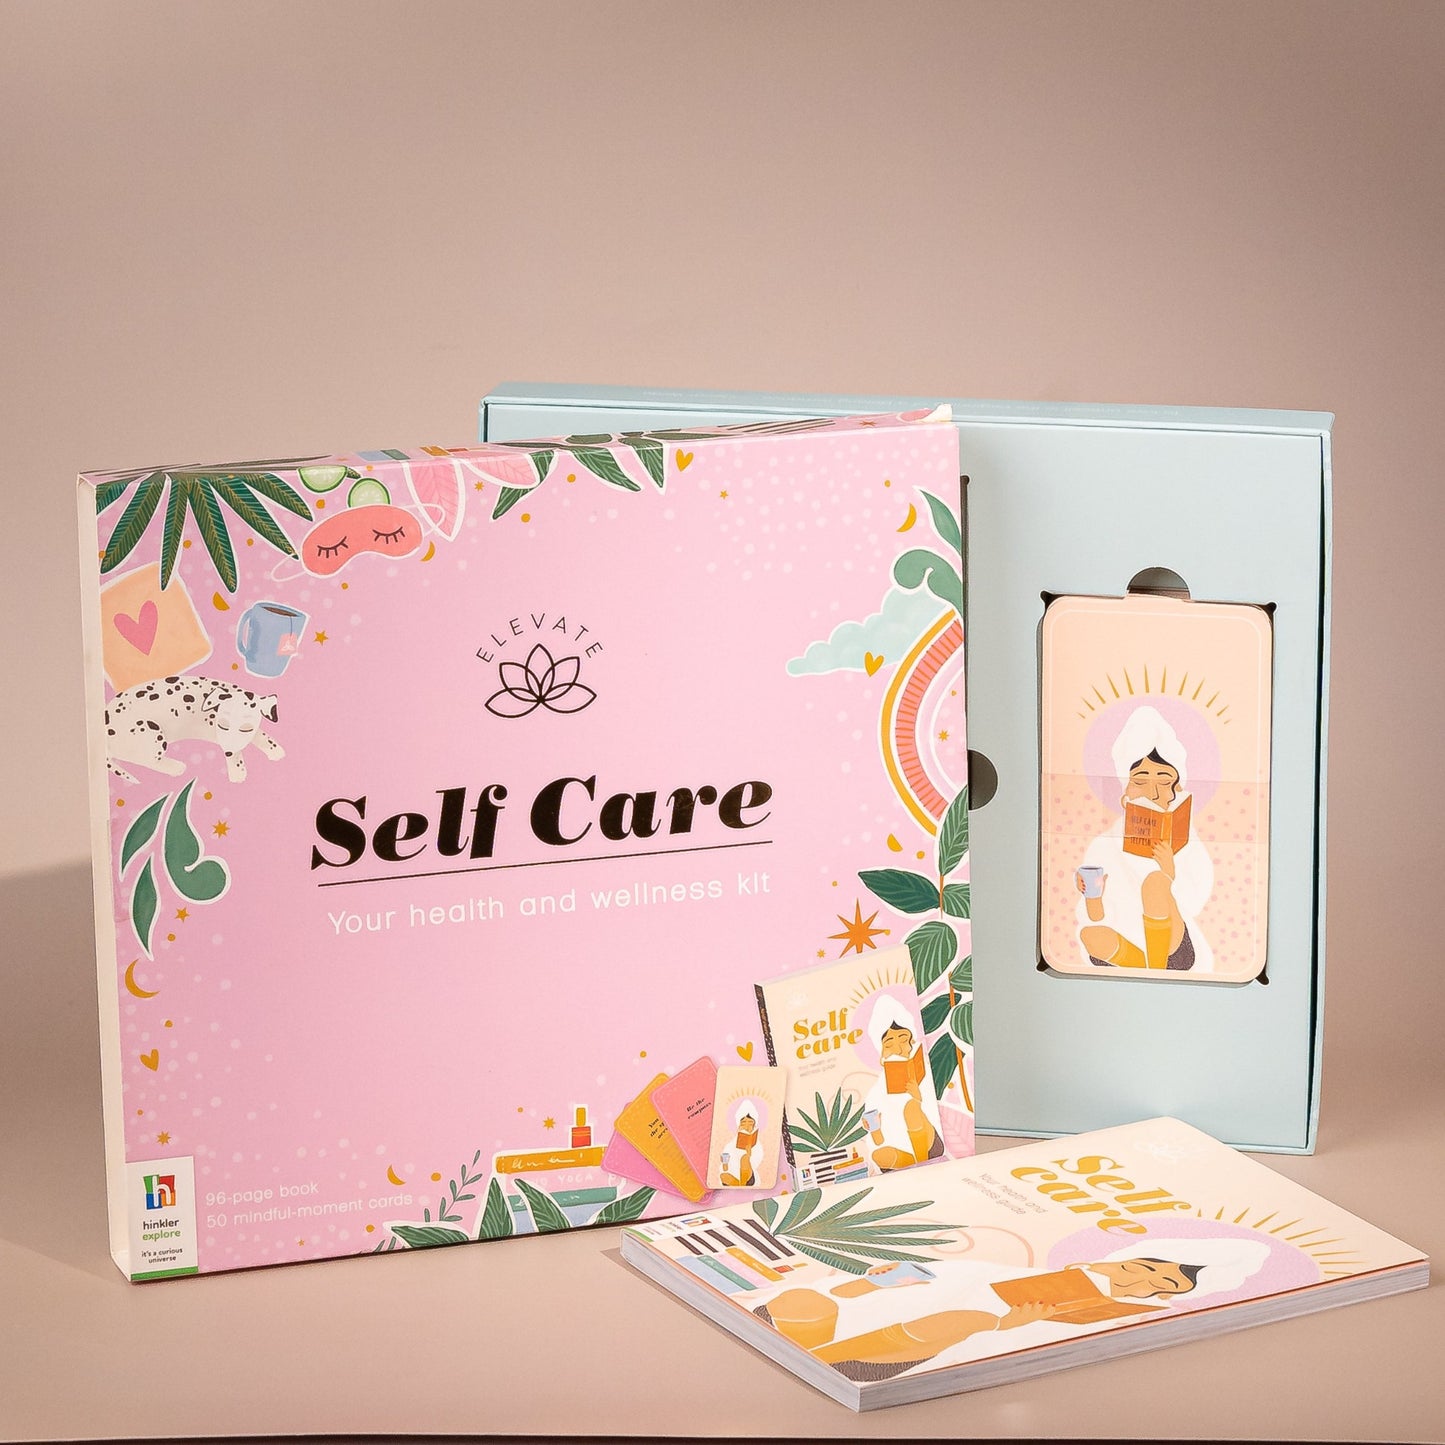 Self Care - Your Health and Wellness Kit